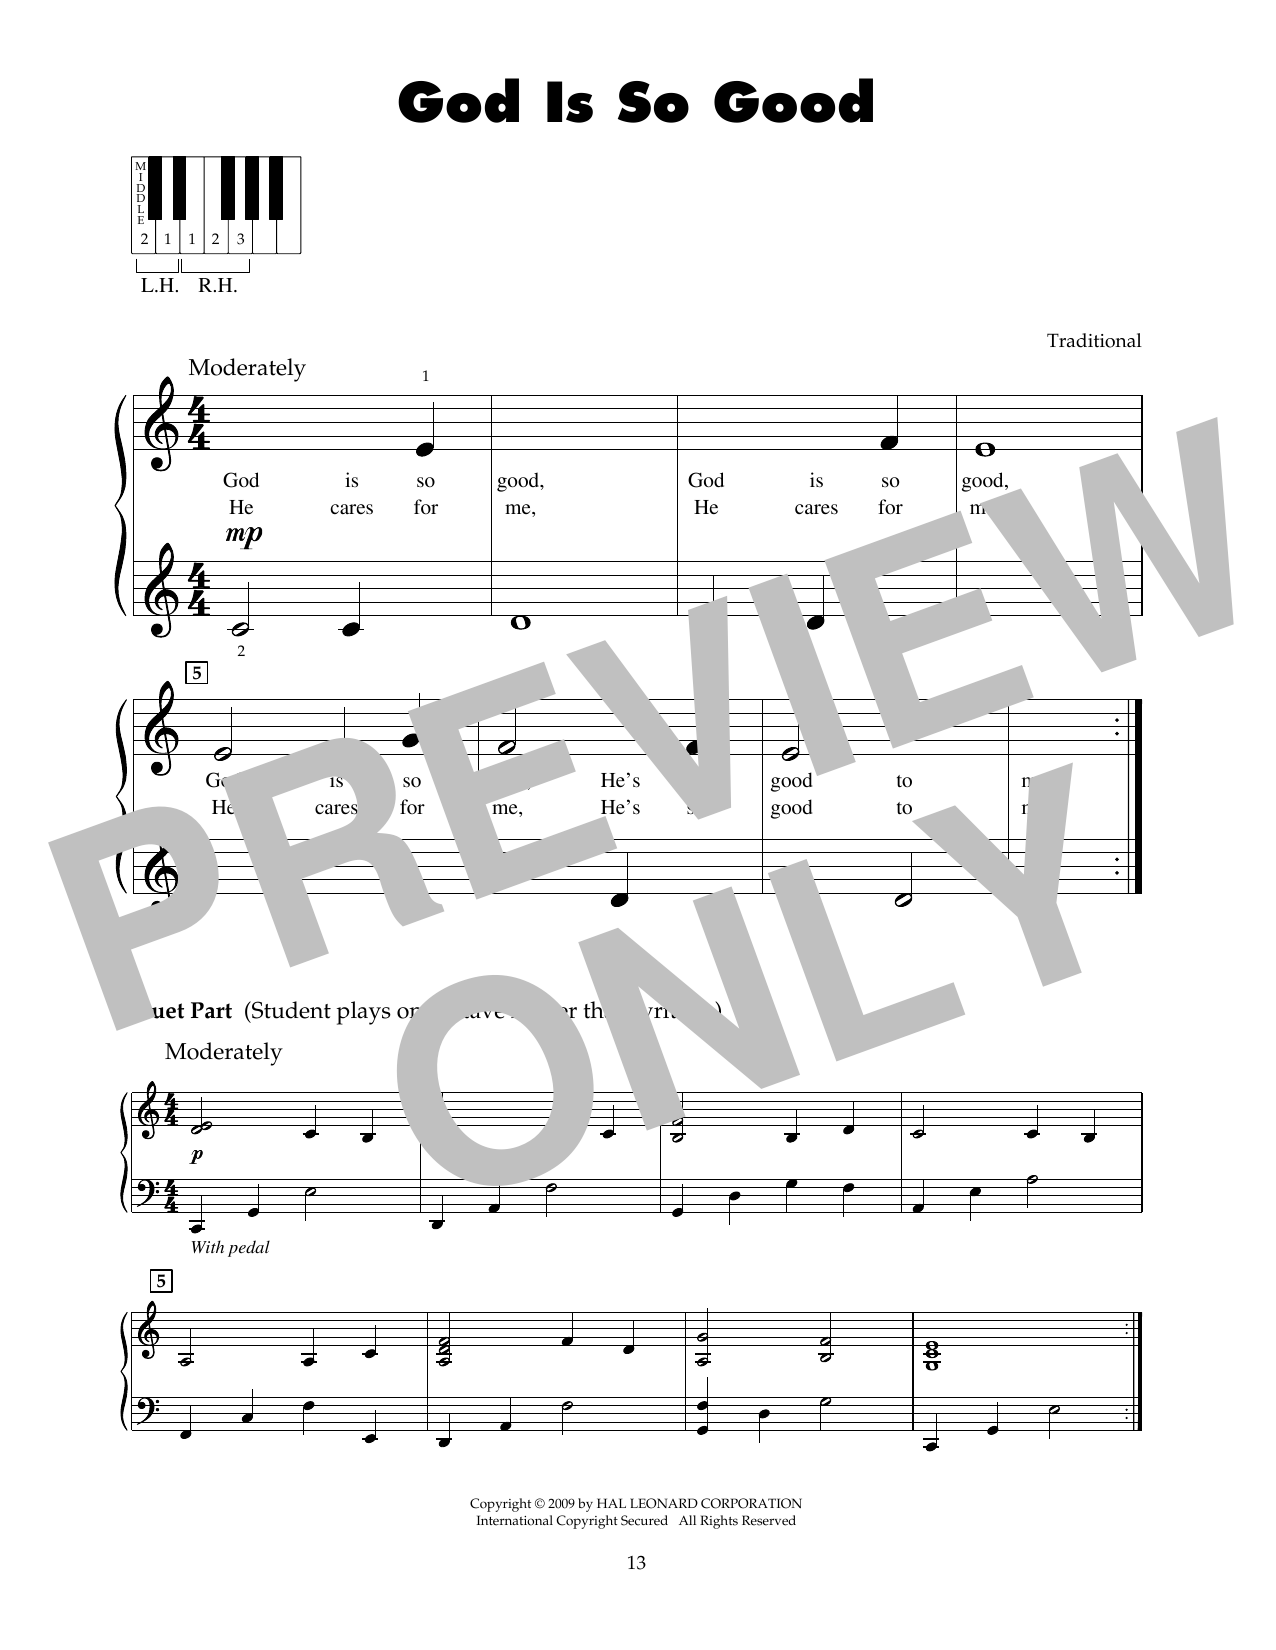 Traditional God Is So Good sheet music notes printable PDF score